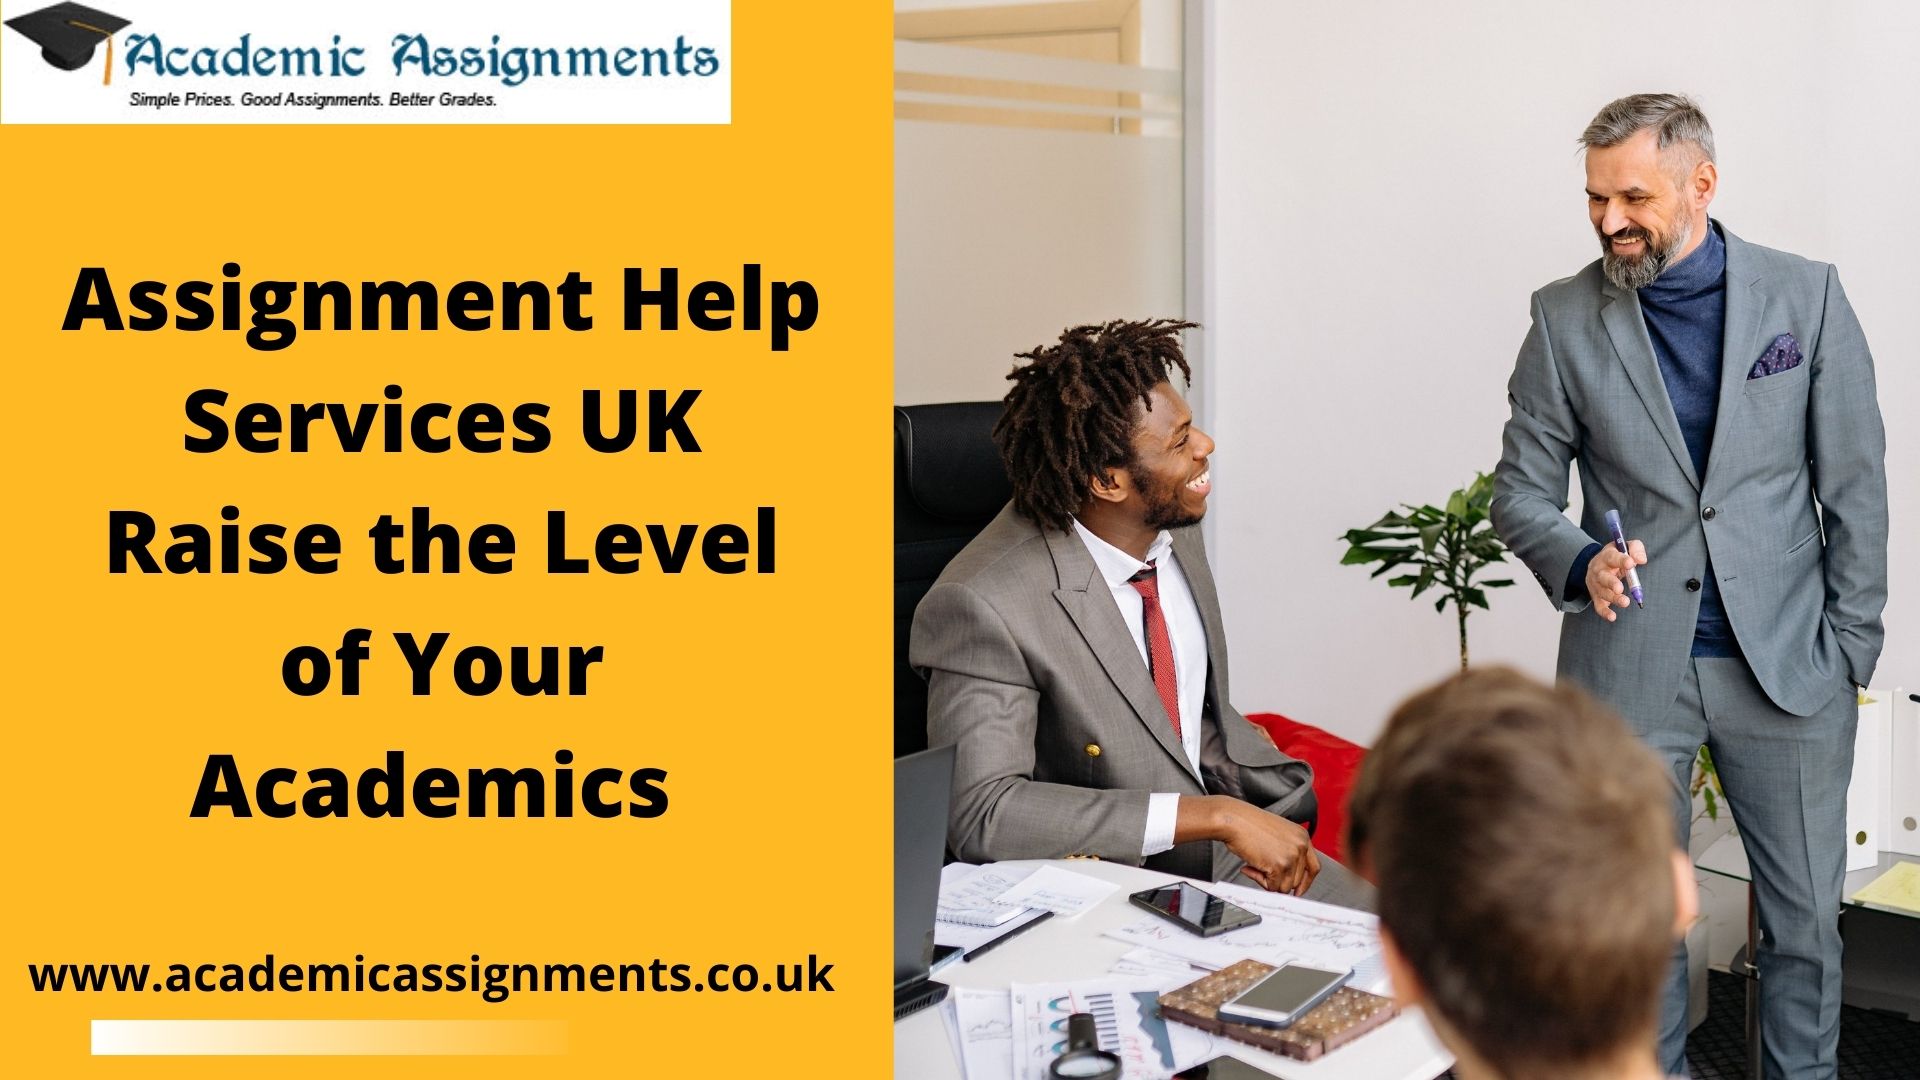 Assignment Help Services UK Raise the Level of Your Academics